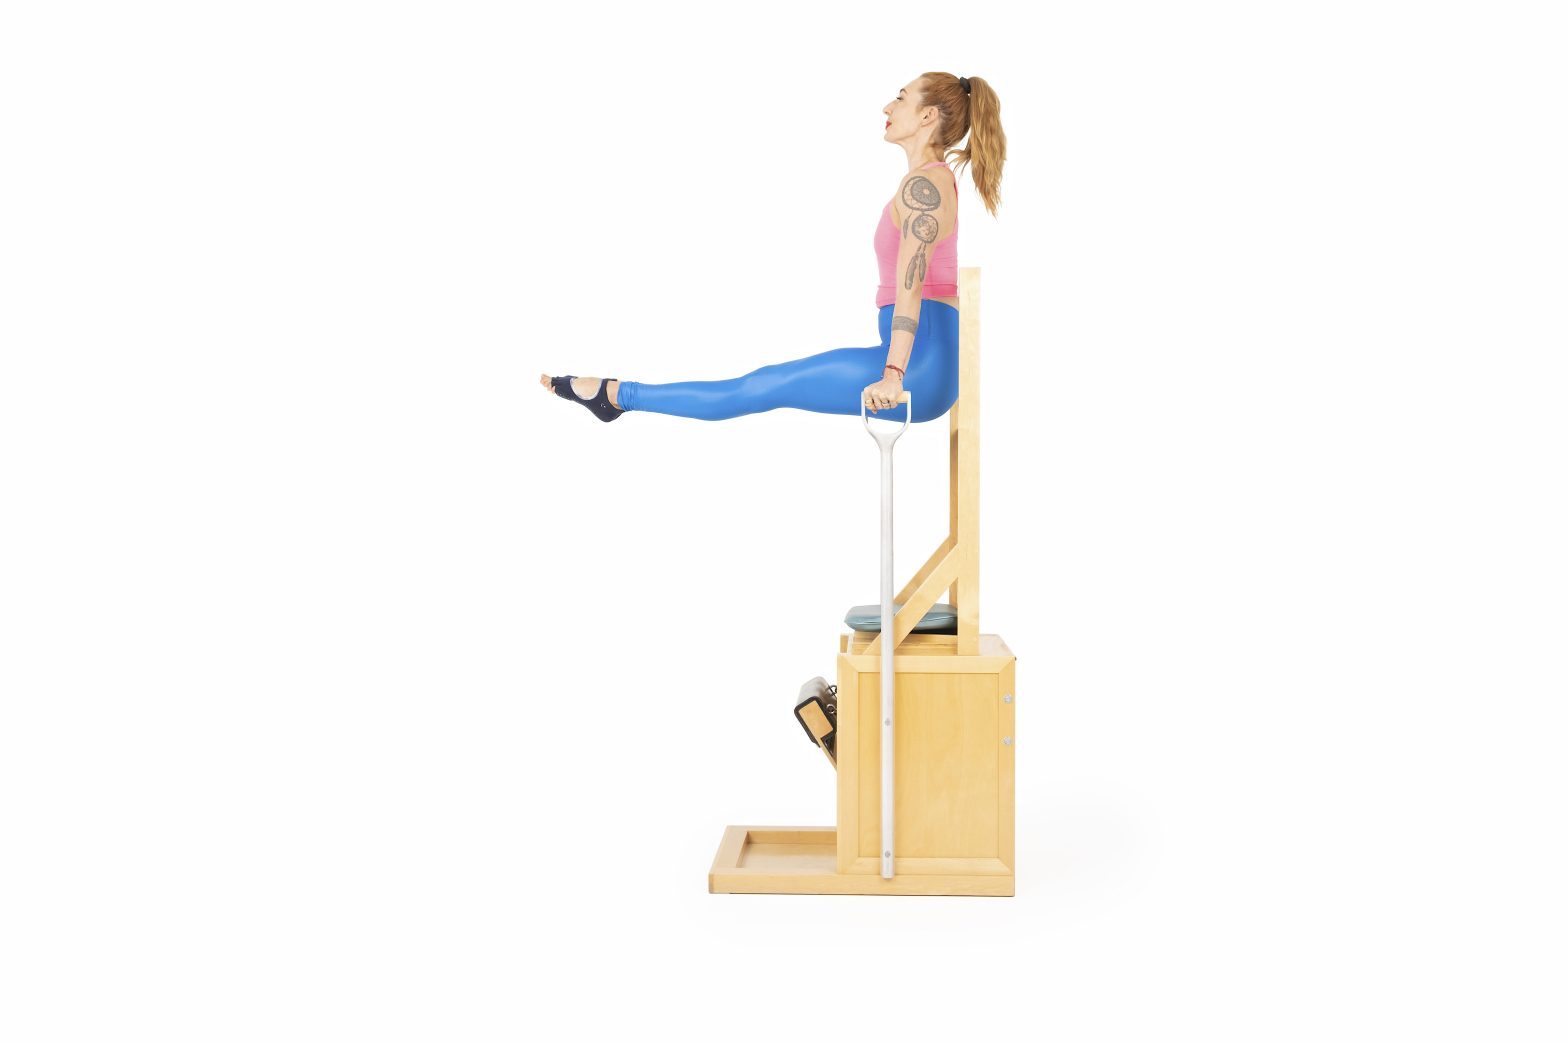 reverse press up advanced on the high chair online pilates classes